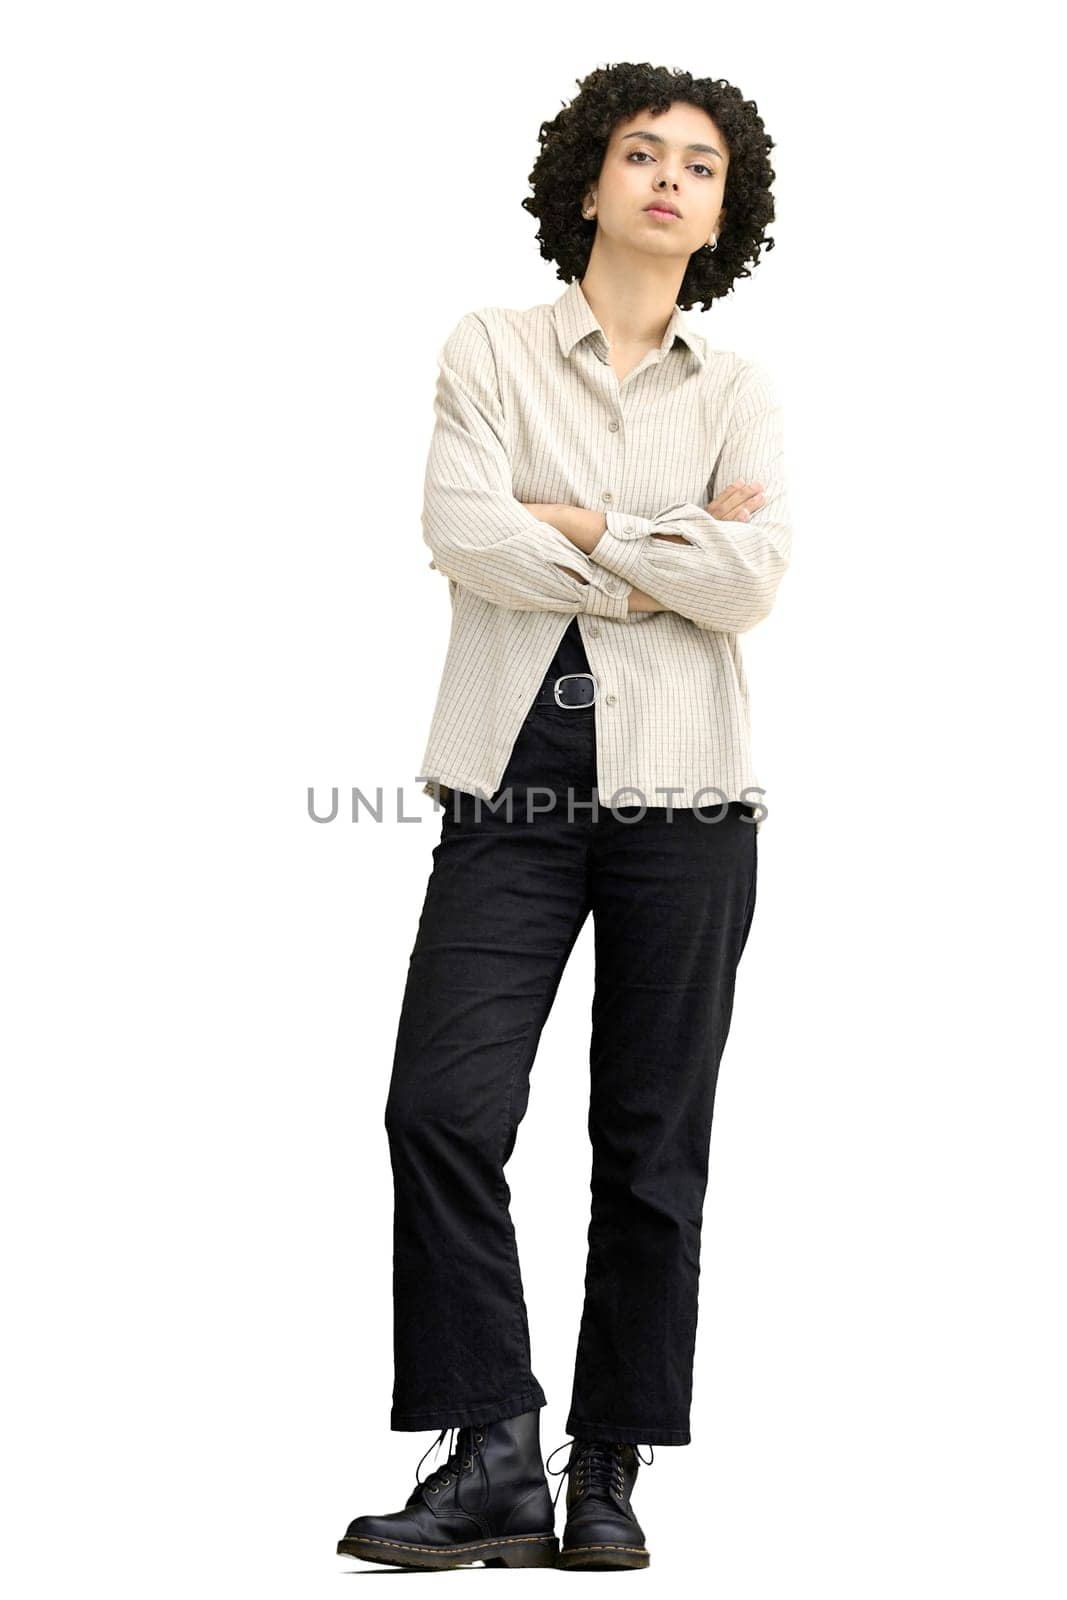 A woman, full-length, on a white background, crossed her arms by Prosto